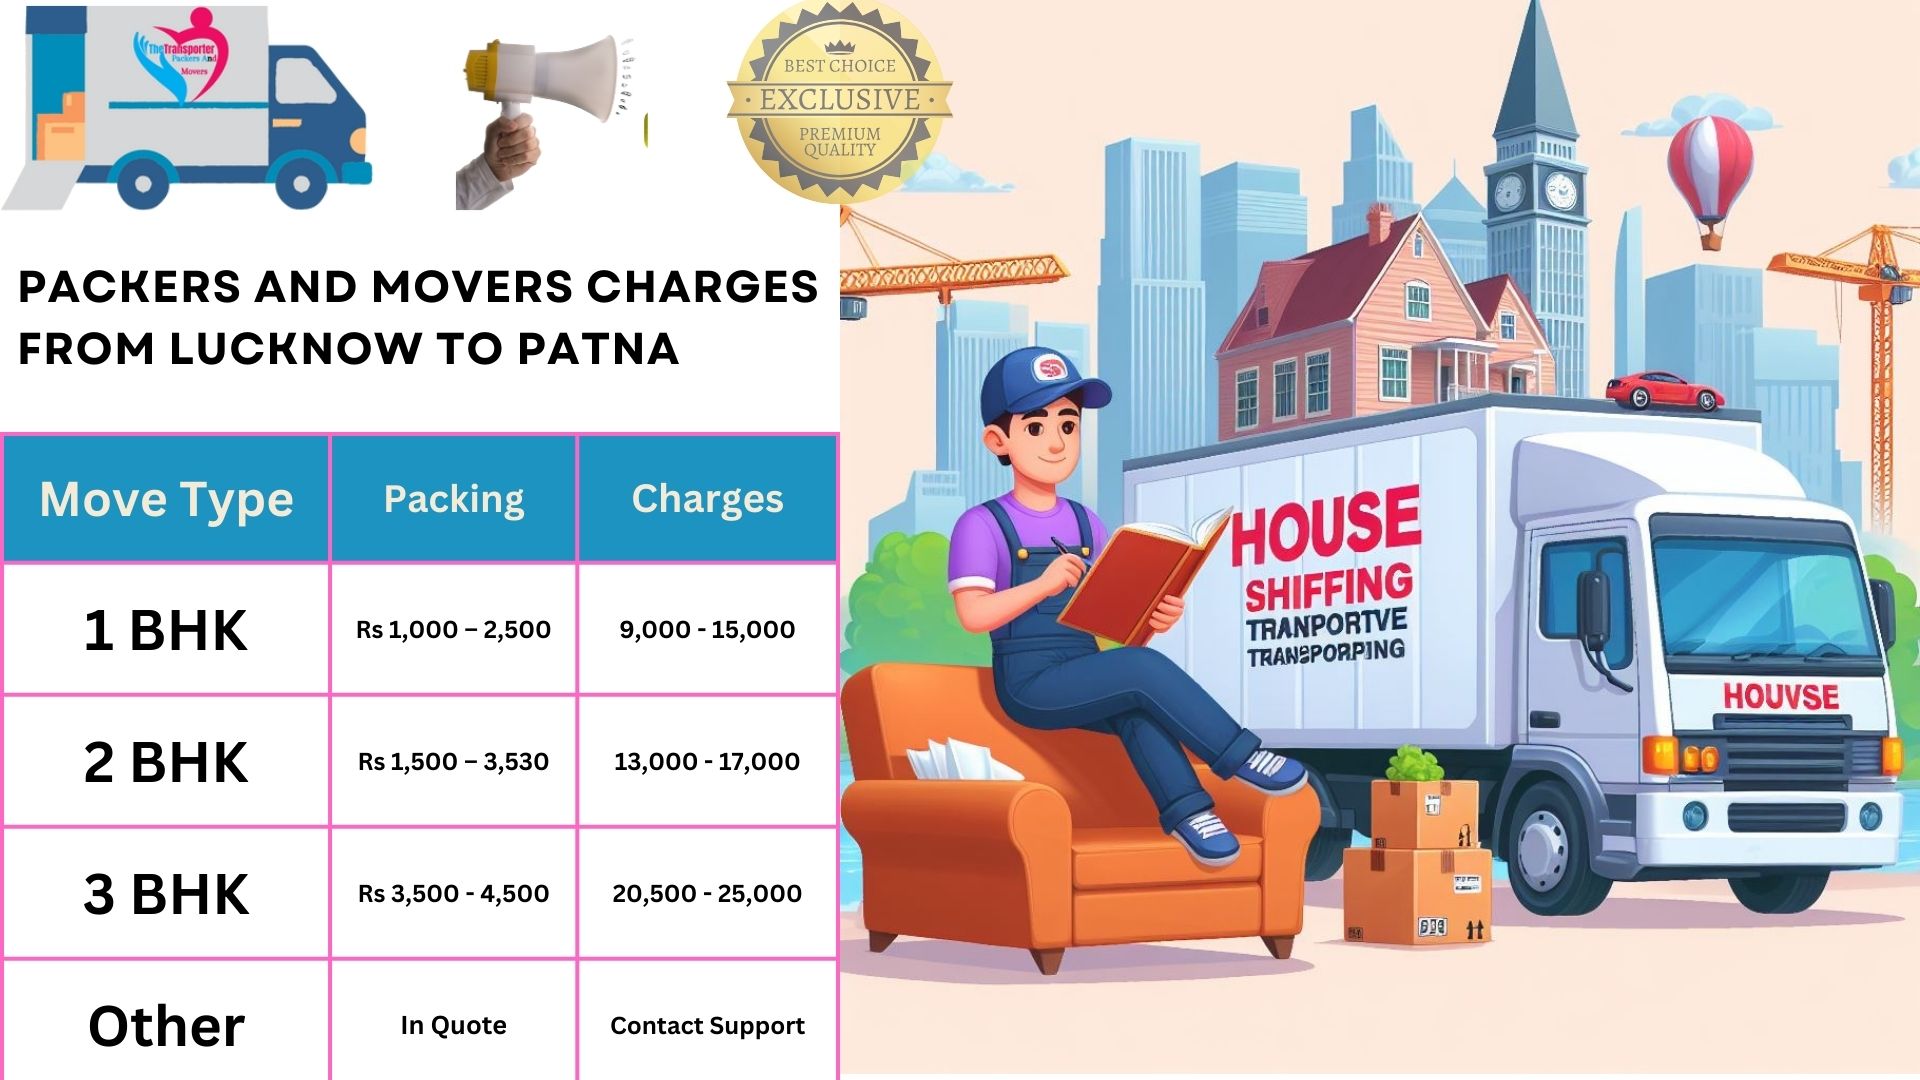 Your household goods shifting from Lucknow to Patna